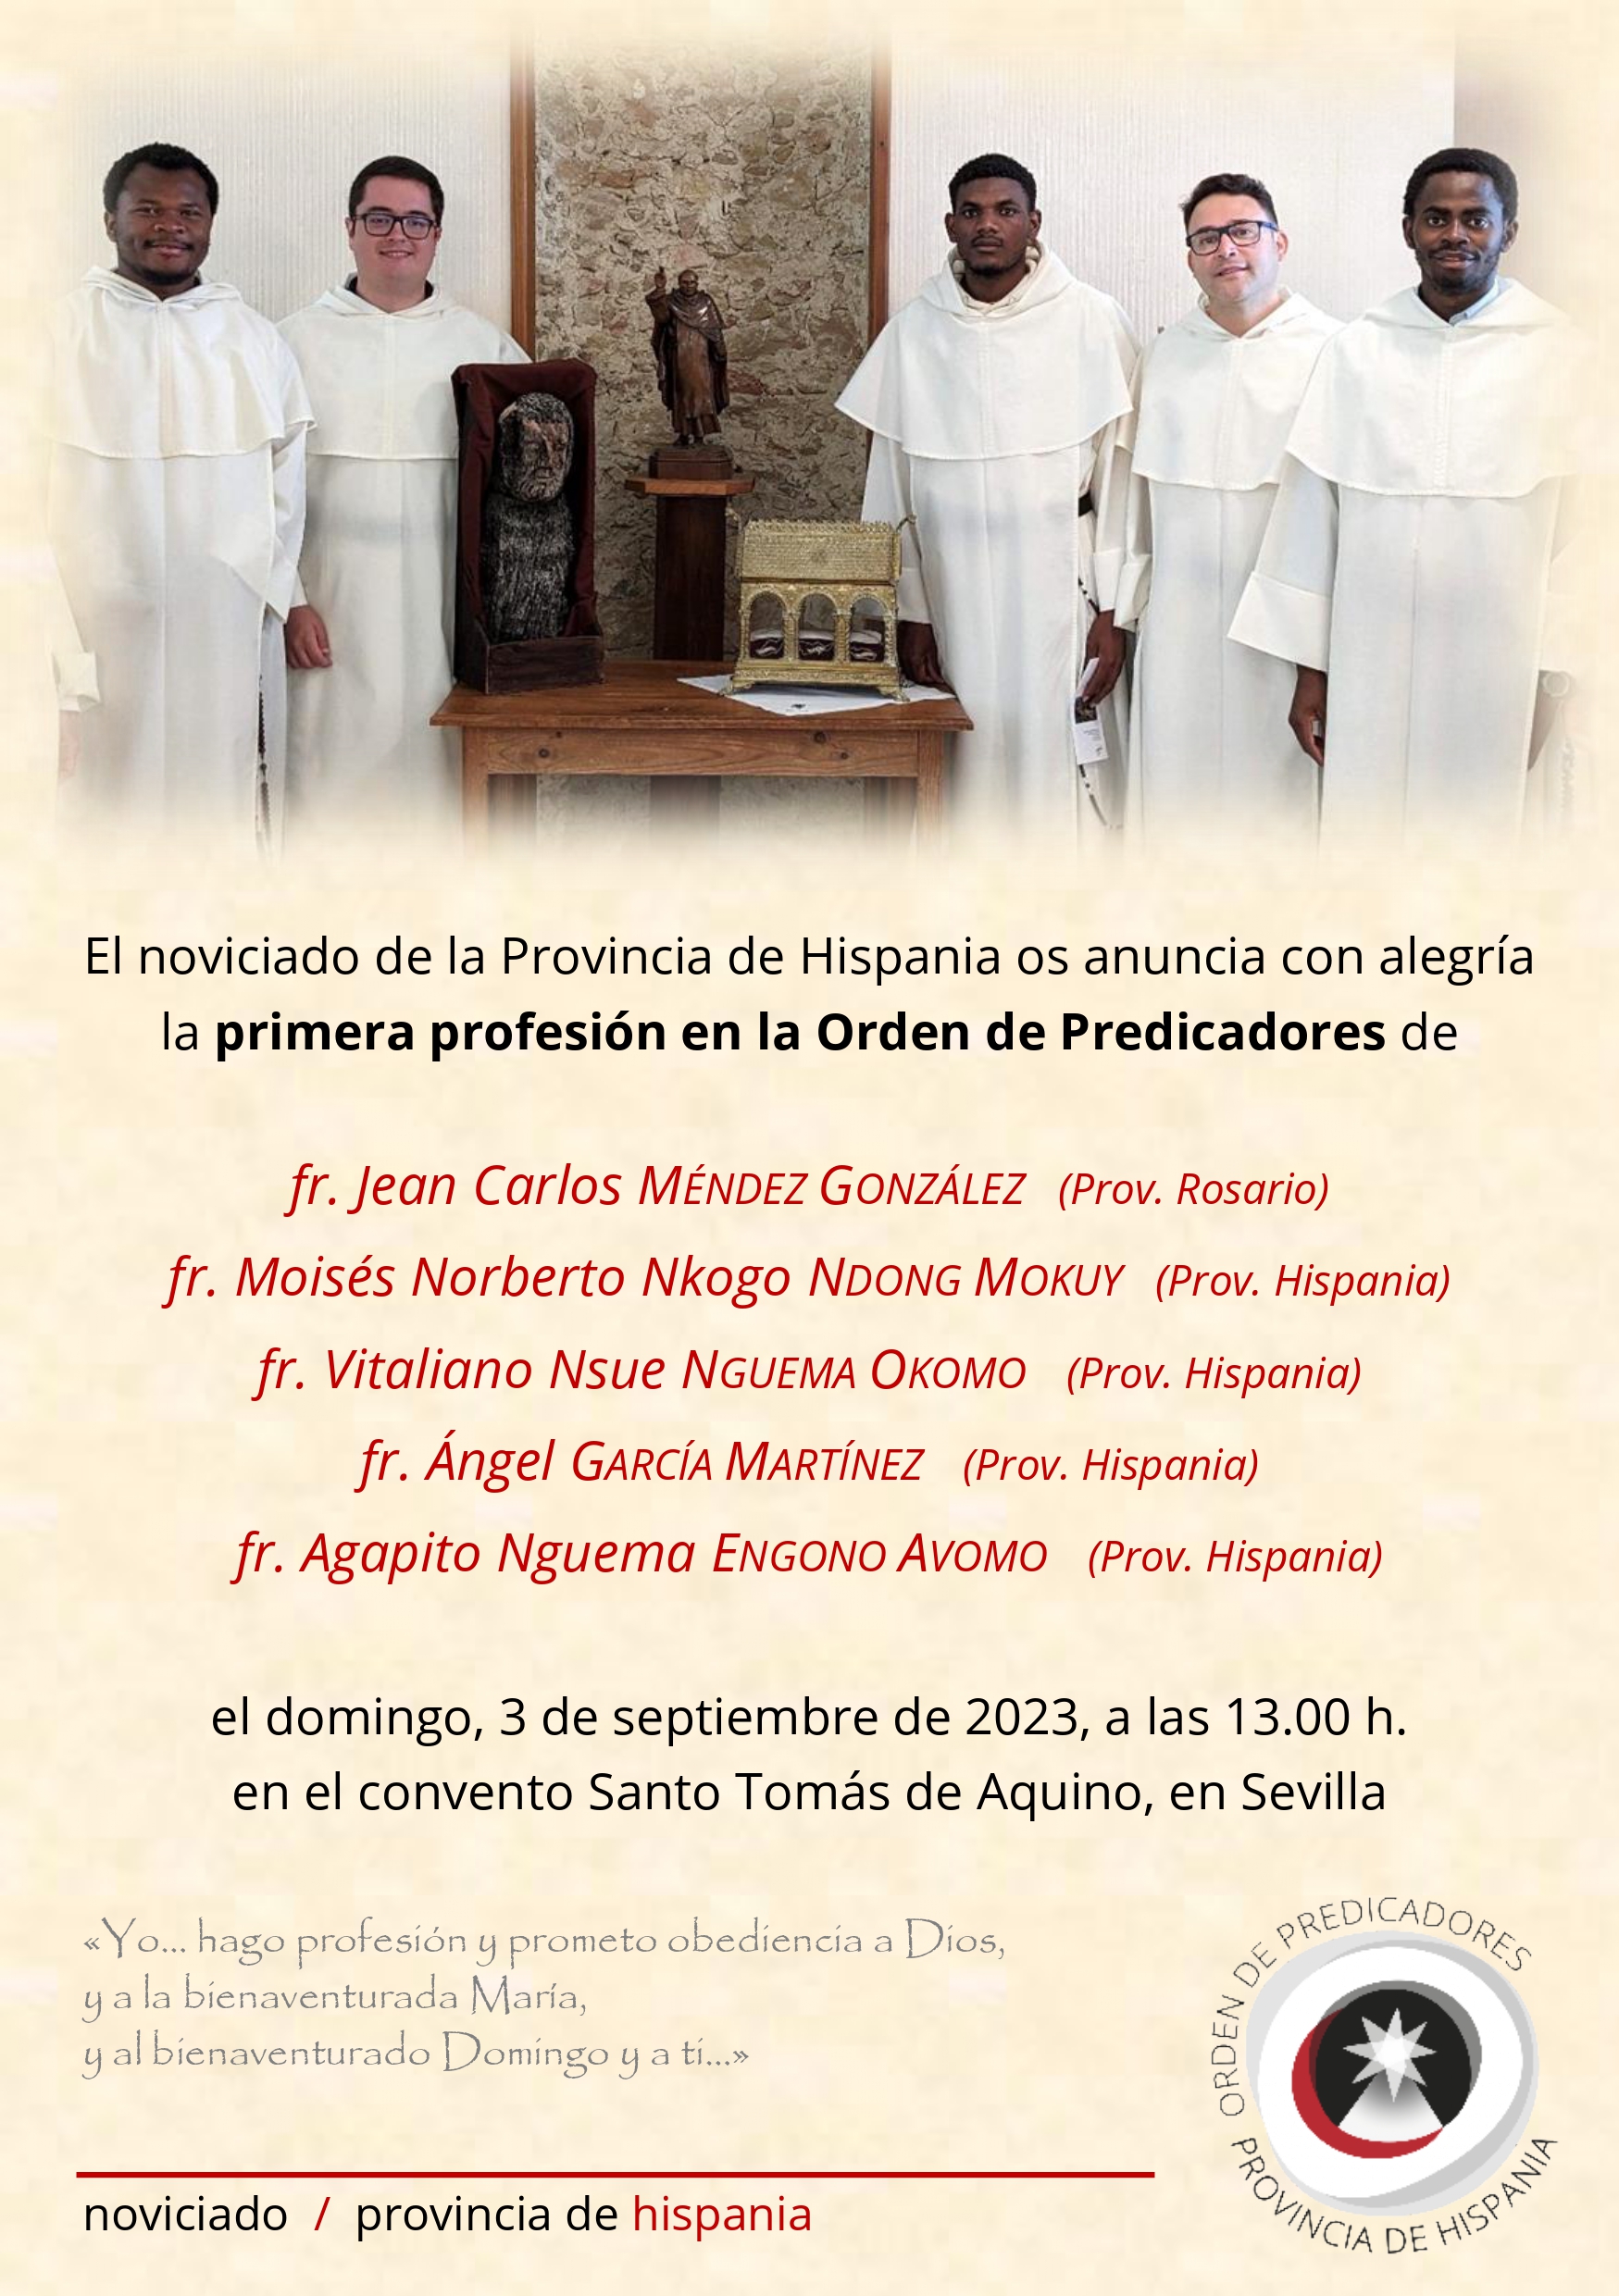 The Invitation of the first profession of Brother Jean Carlos in Spain